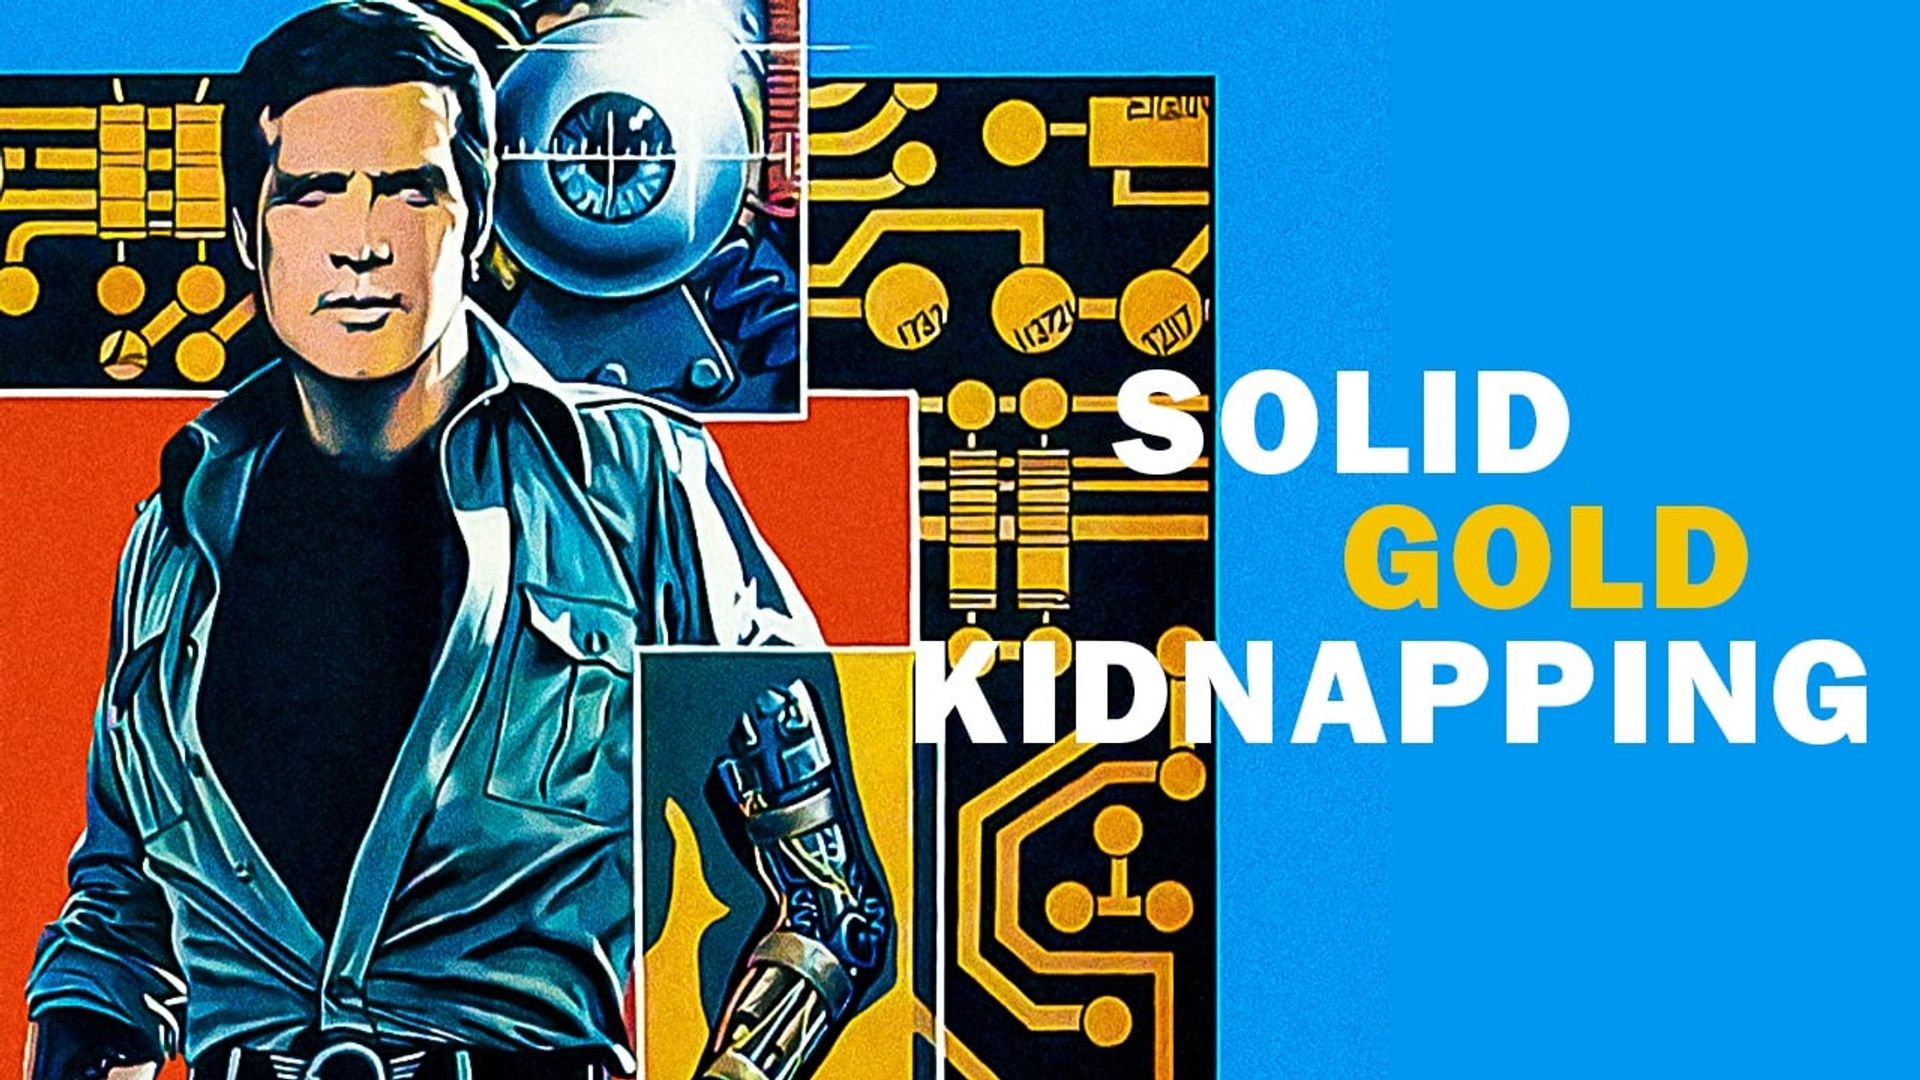 The Six Million Dollar Man: The Solid Gold Kidnapping background